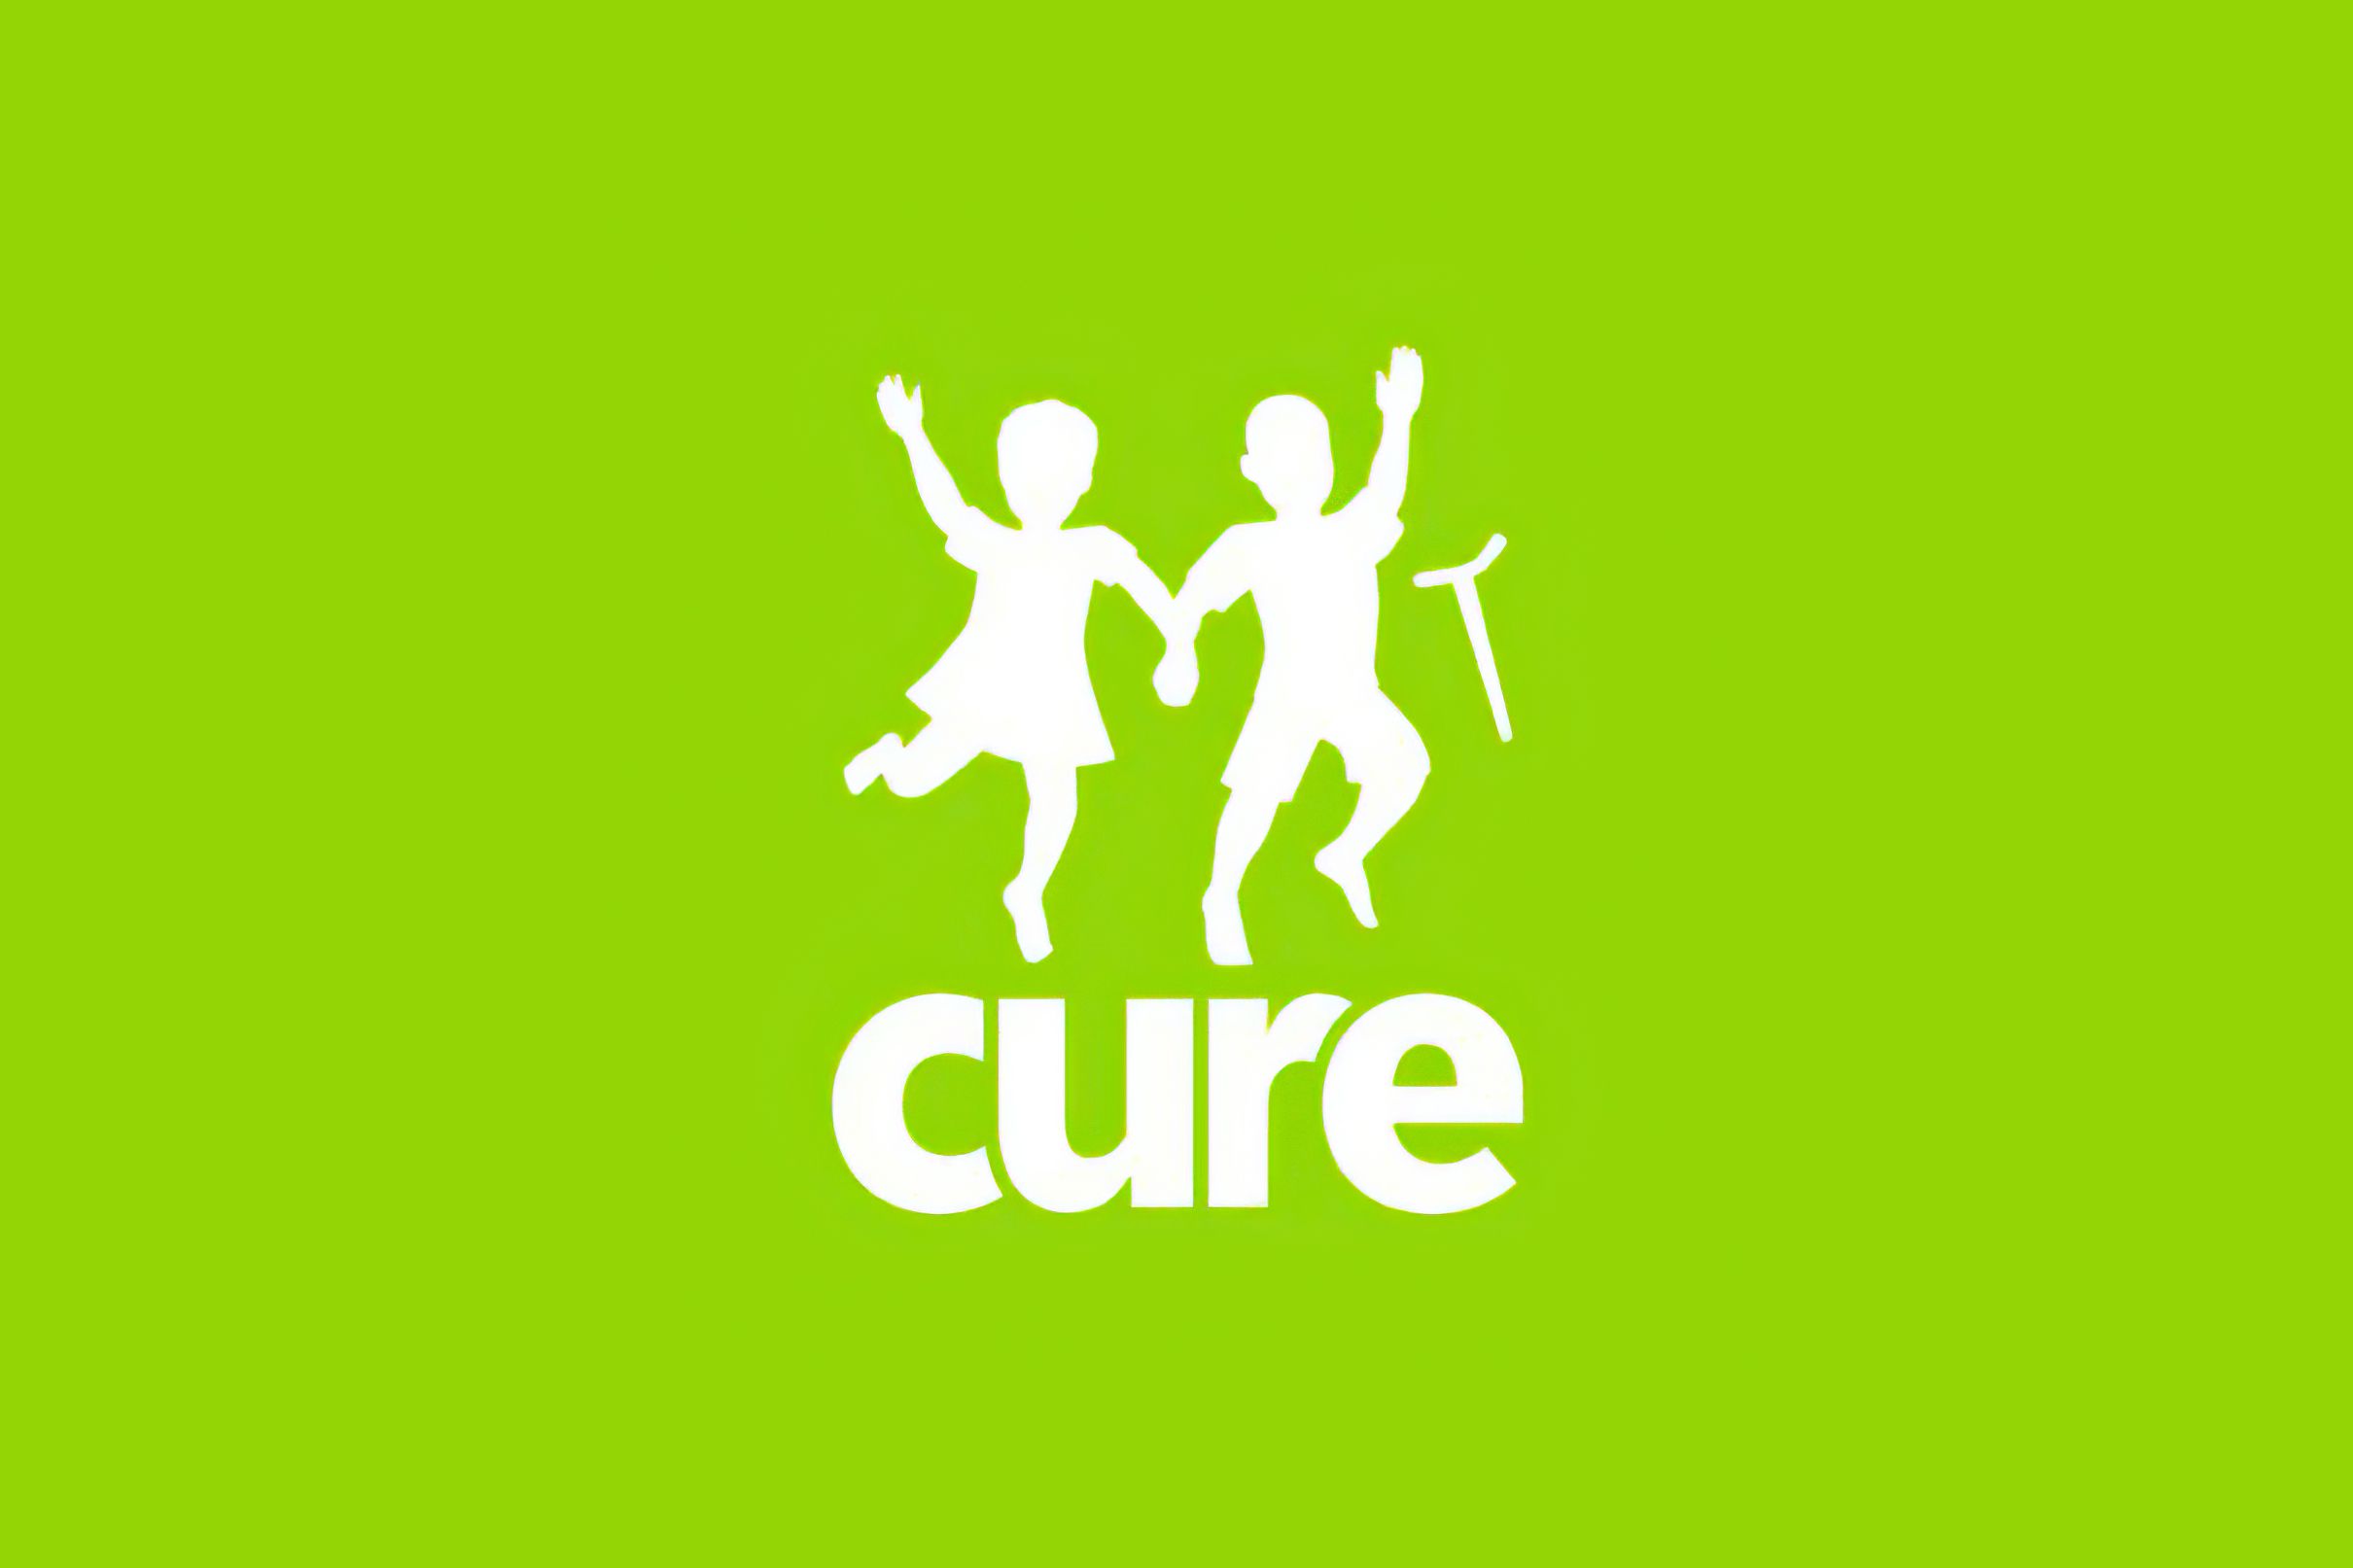 CURE International plans to open Children's Hospital of Zimbabwe, provide life-transforming medical care to thousands of vulnerable children